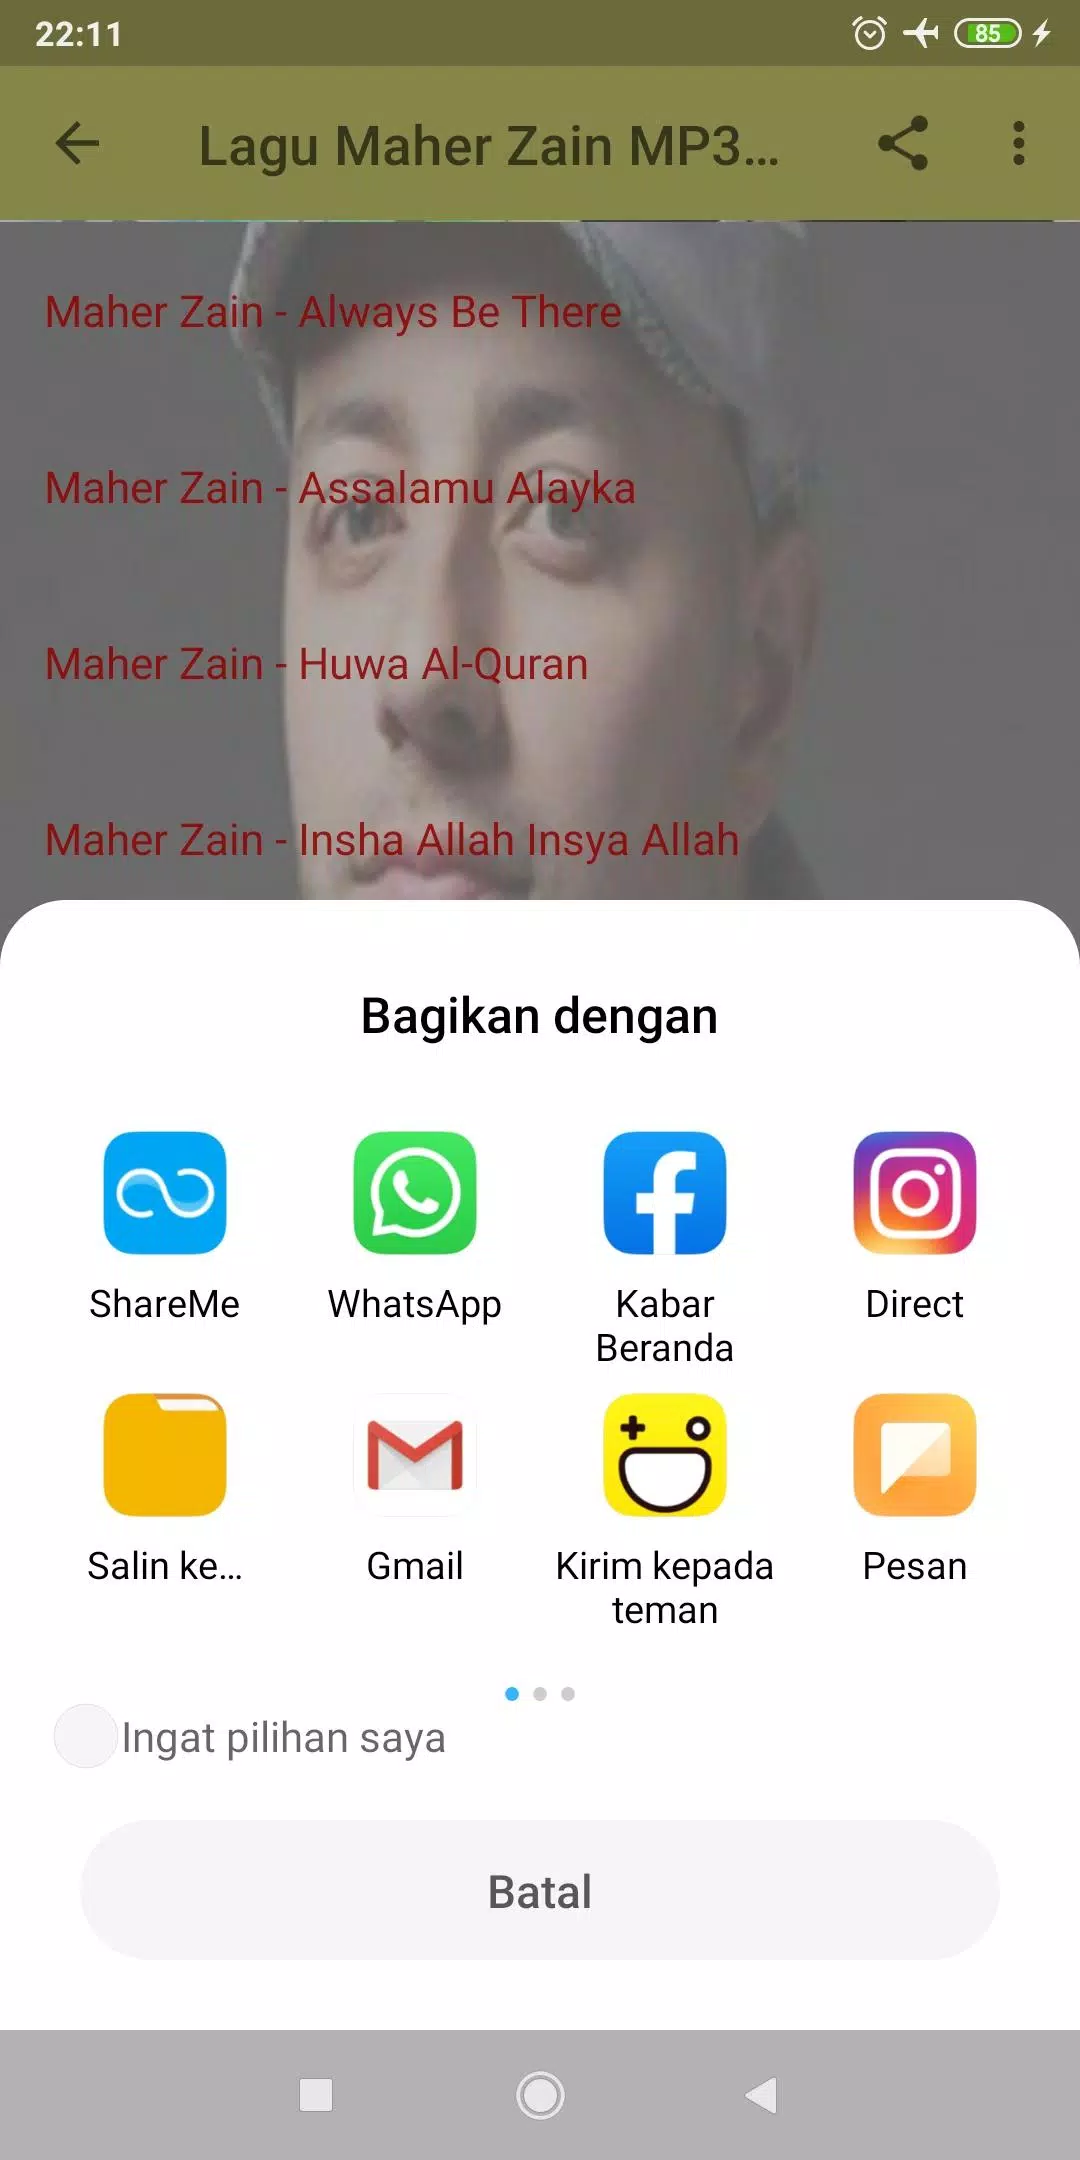 Maher Zain songs mp3 offline APK for Android Download